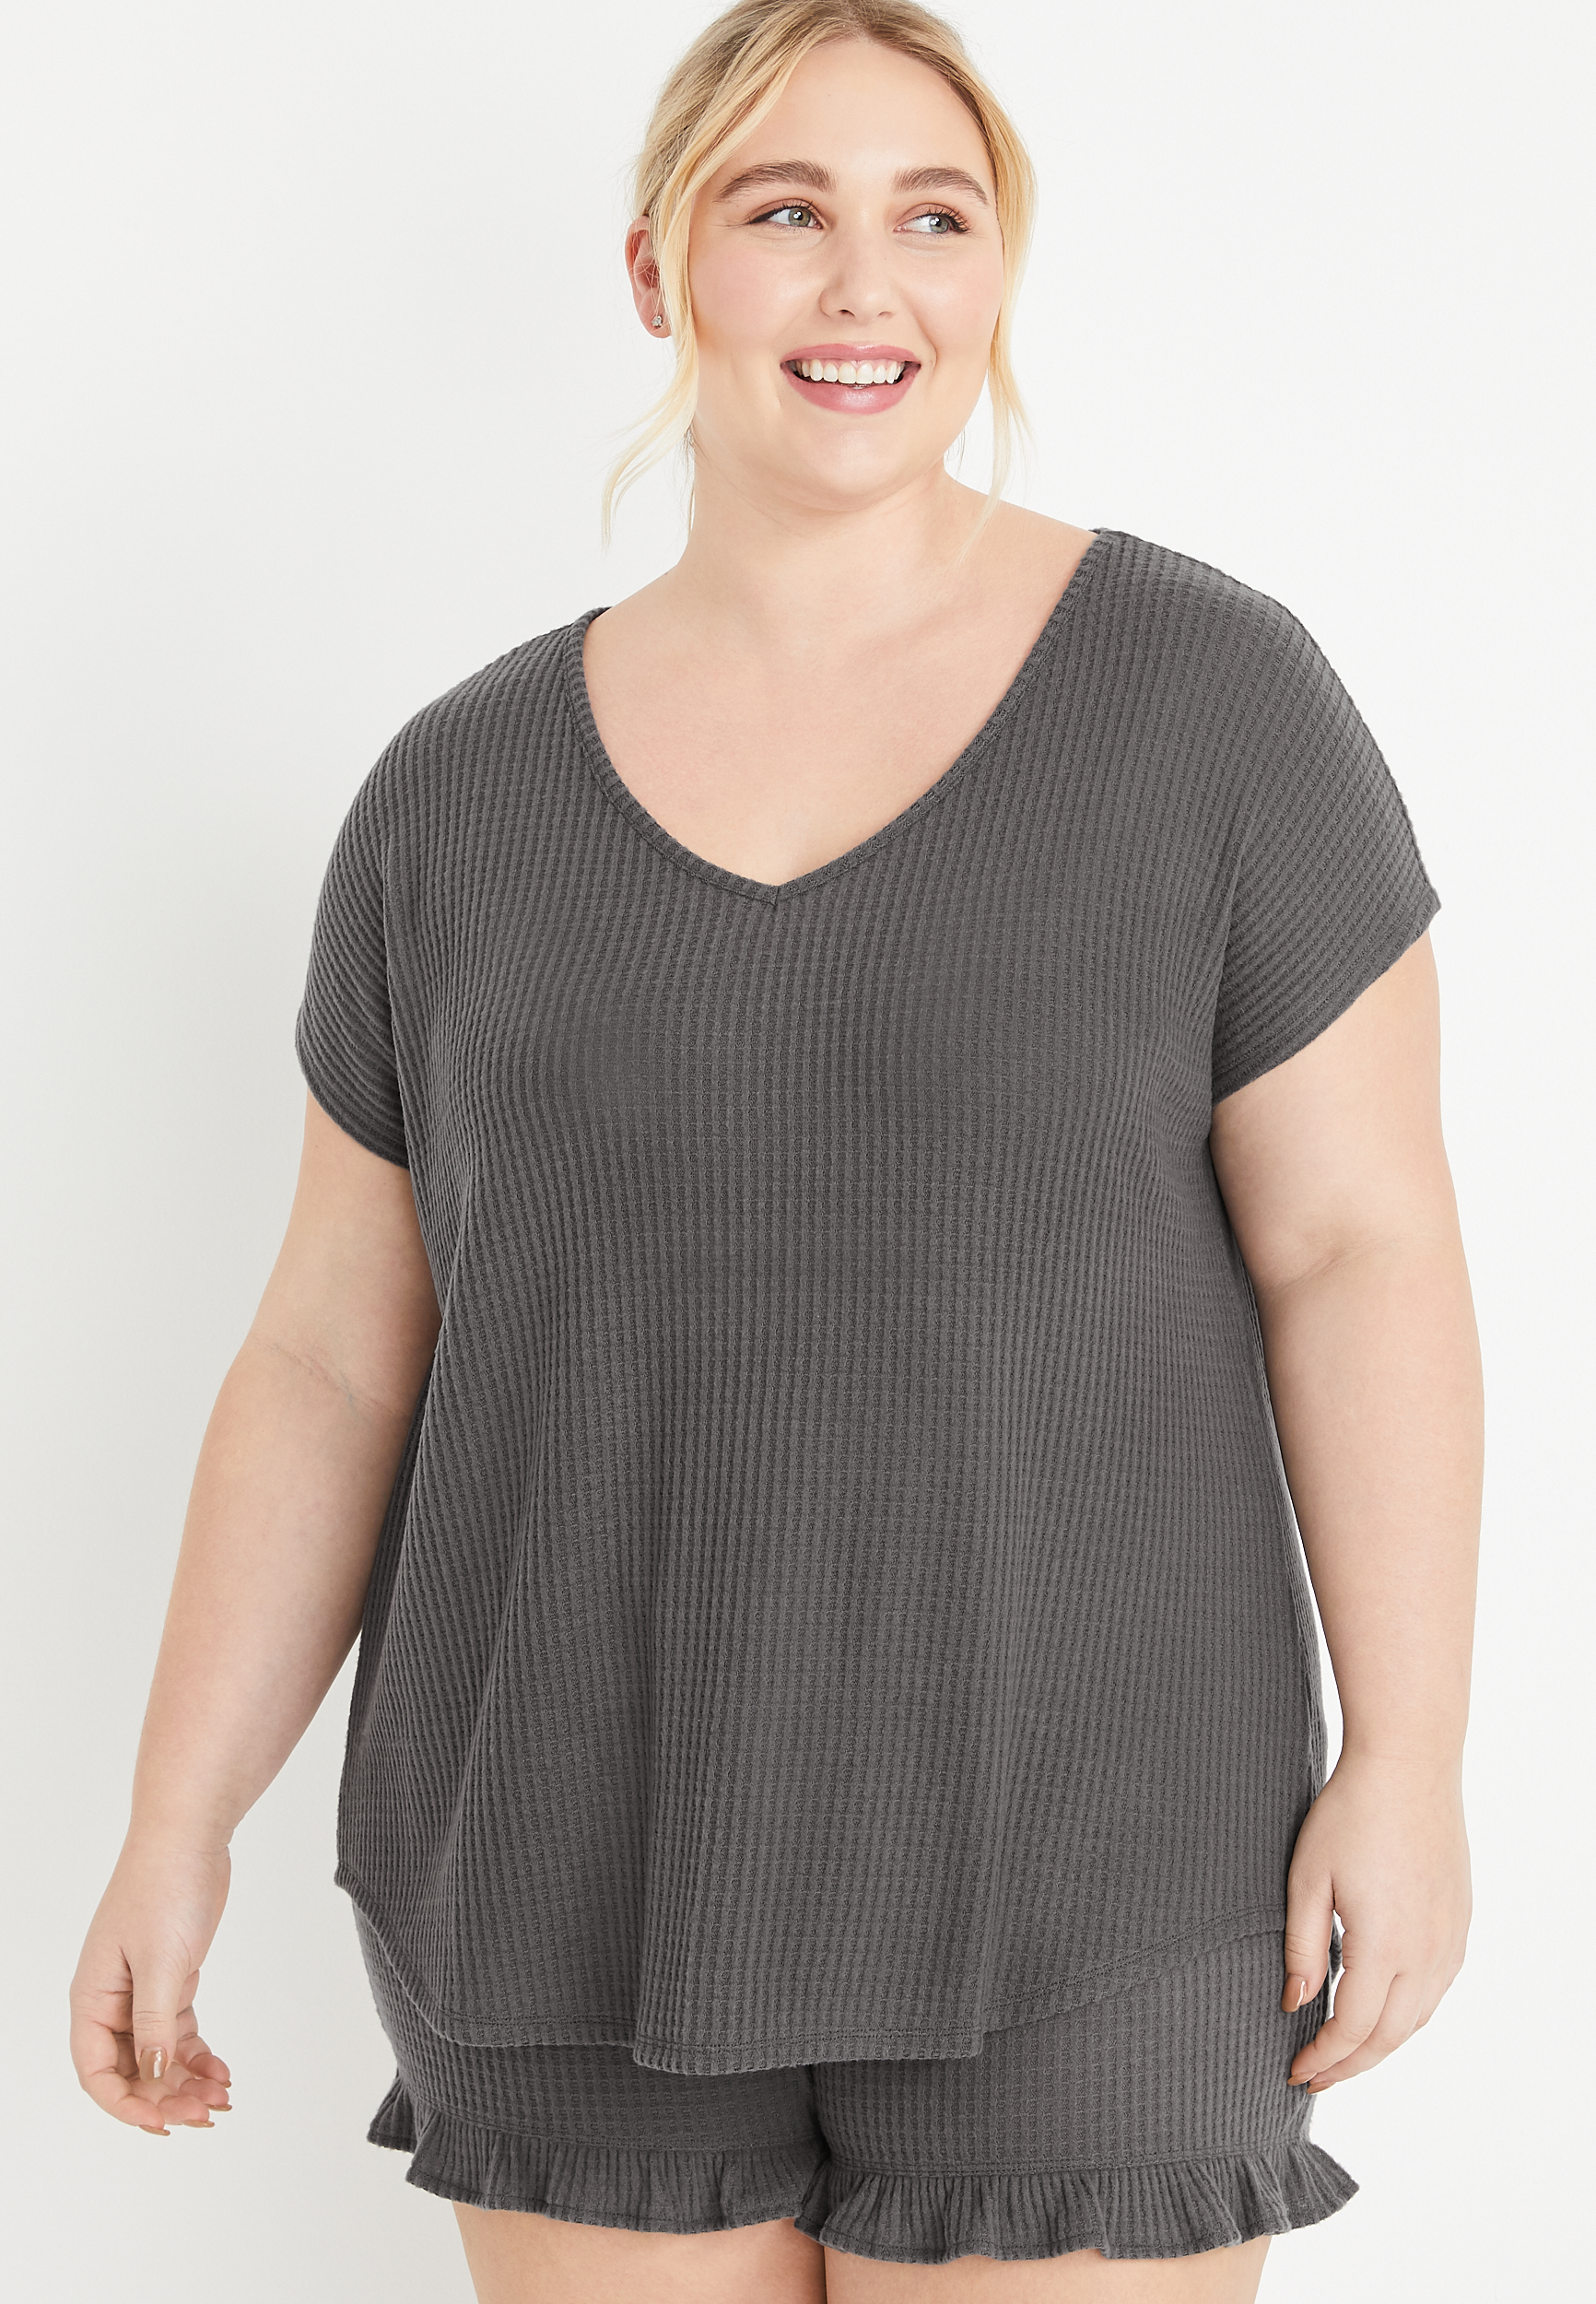 Gemme insulator Ups New Arrival Plus Size Tops For Women: Sweaters, Tees & More | maurices